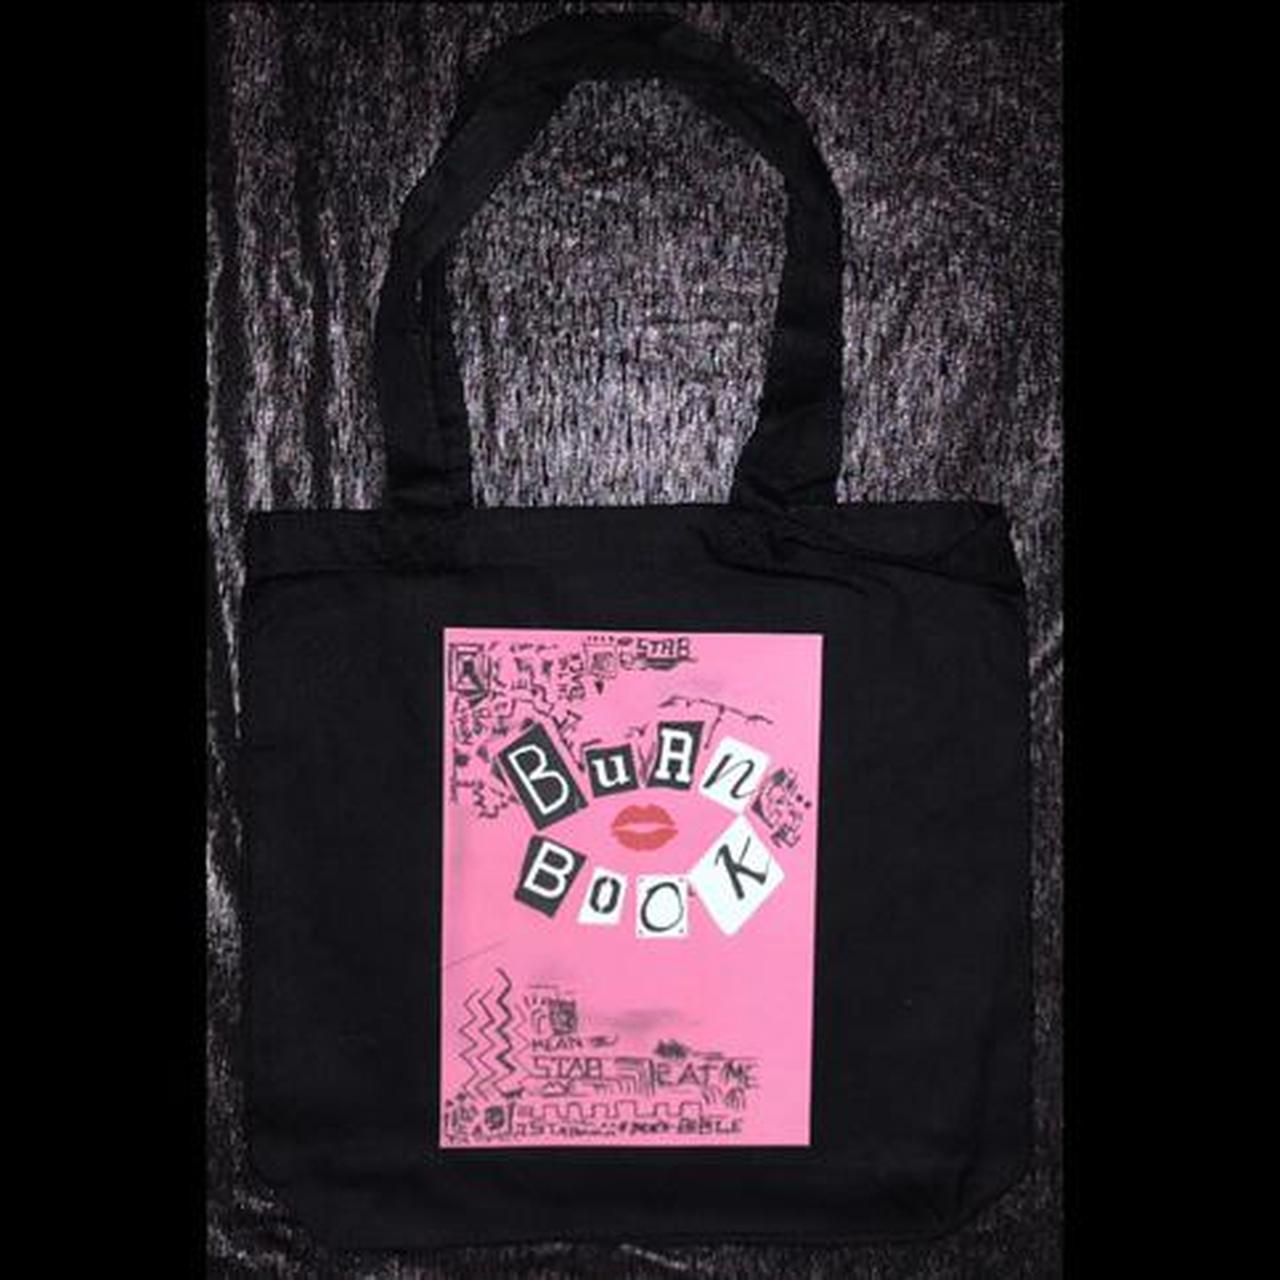 Mean Girls Tote Bags for Sale